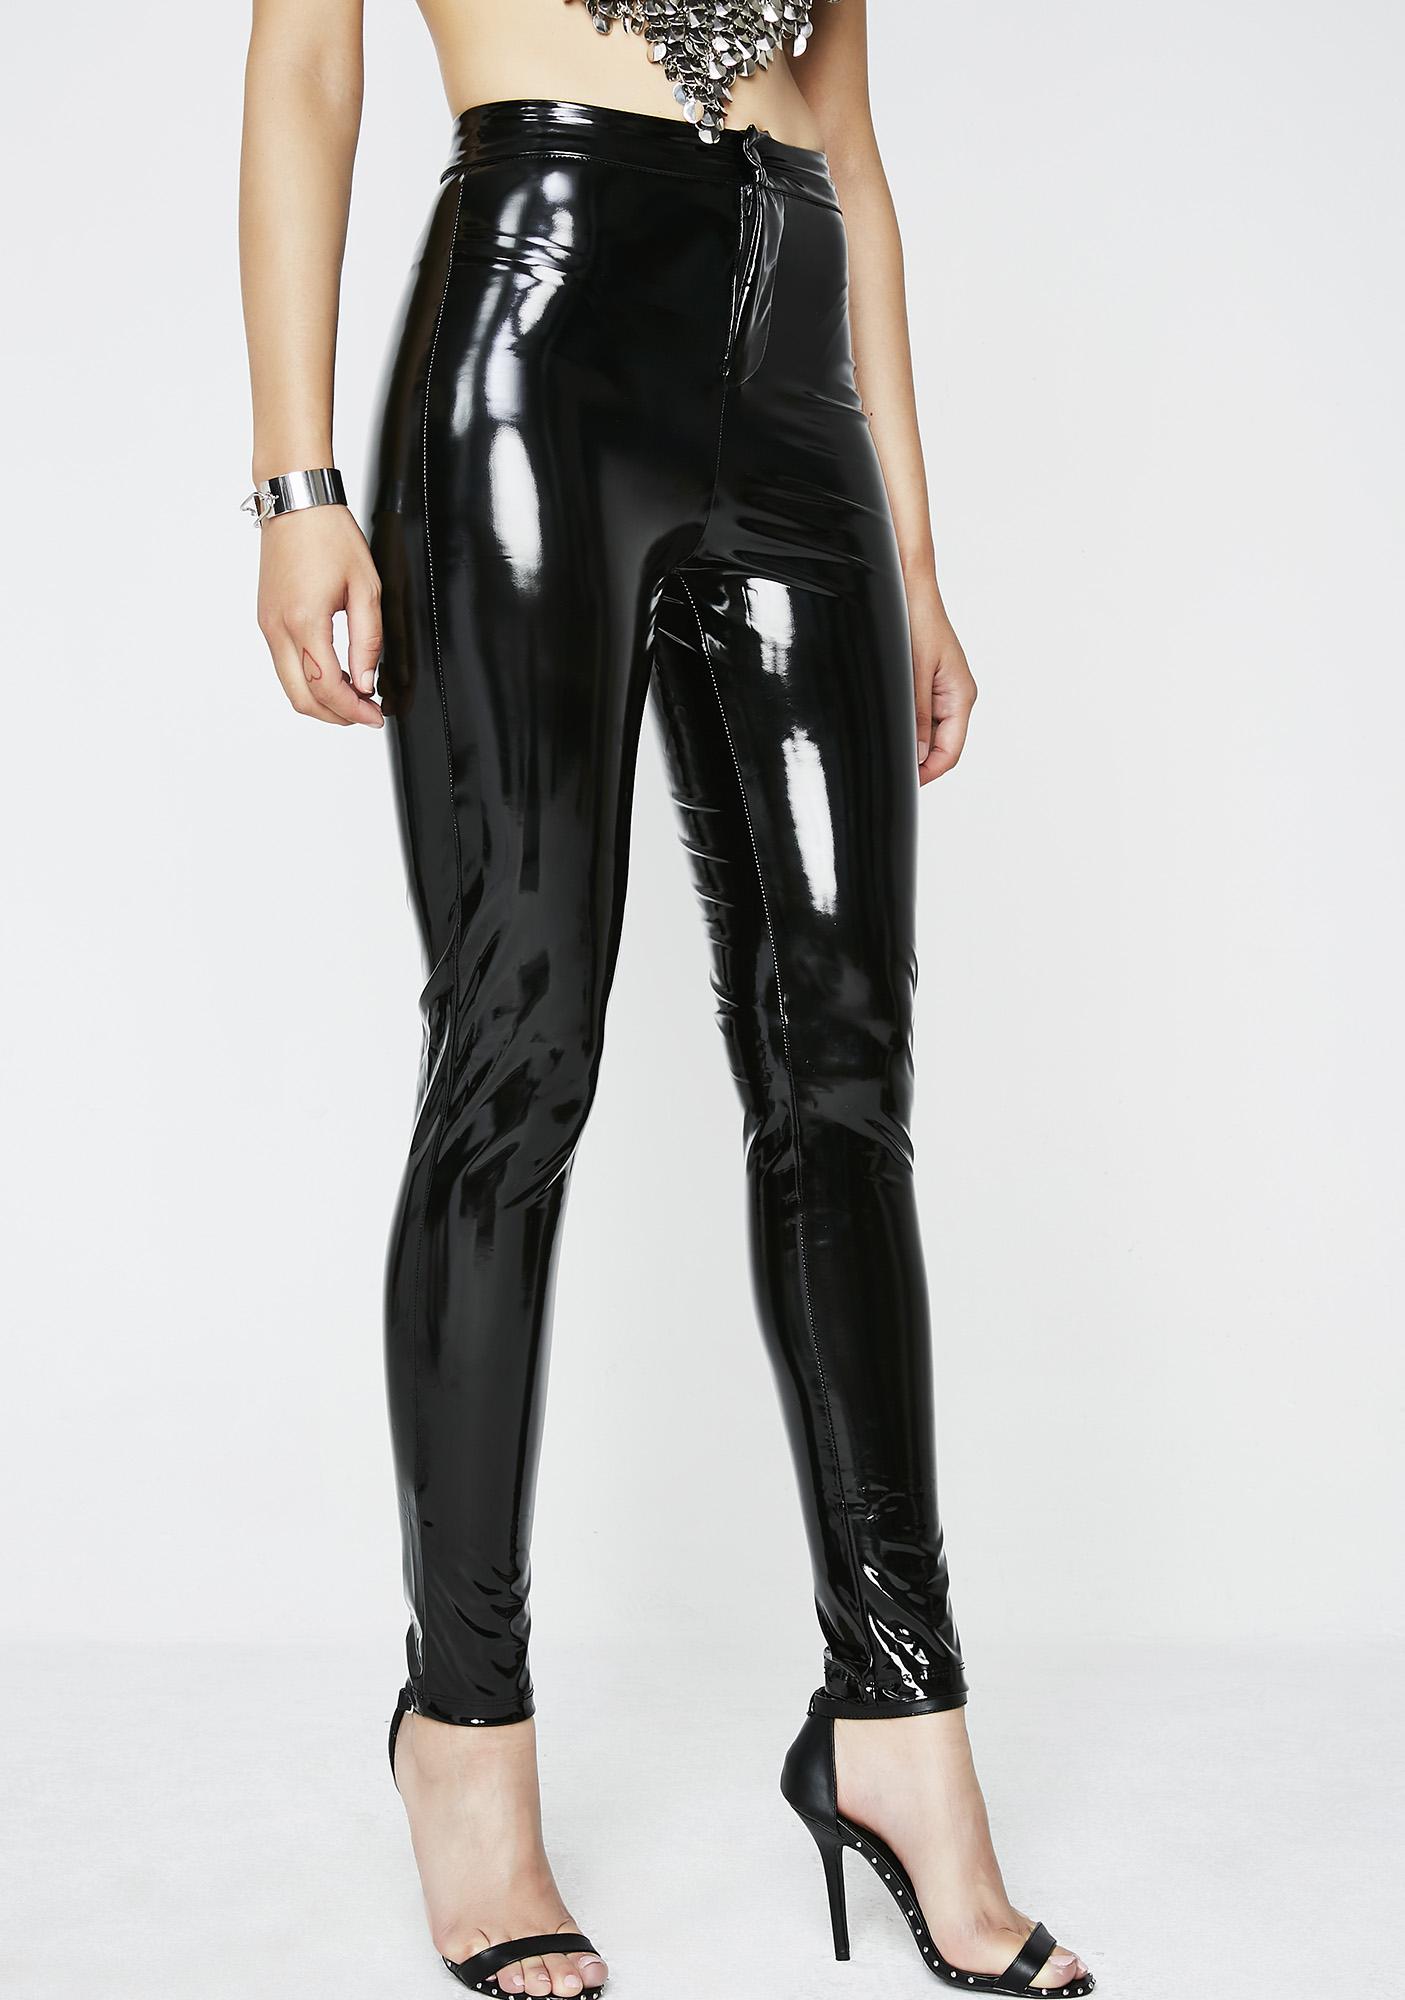 Women Shiny PU Leather White PVC Pants Slims Plus Size Sexy Leggings Latex  Stretchy High Waist Bodycon Pants Summer Trousers 